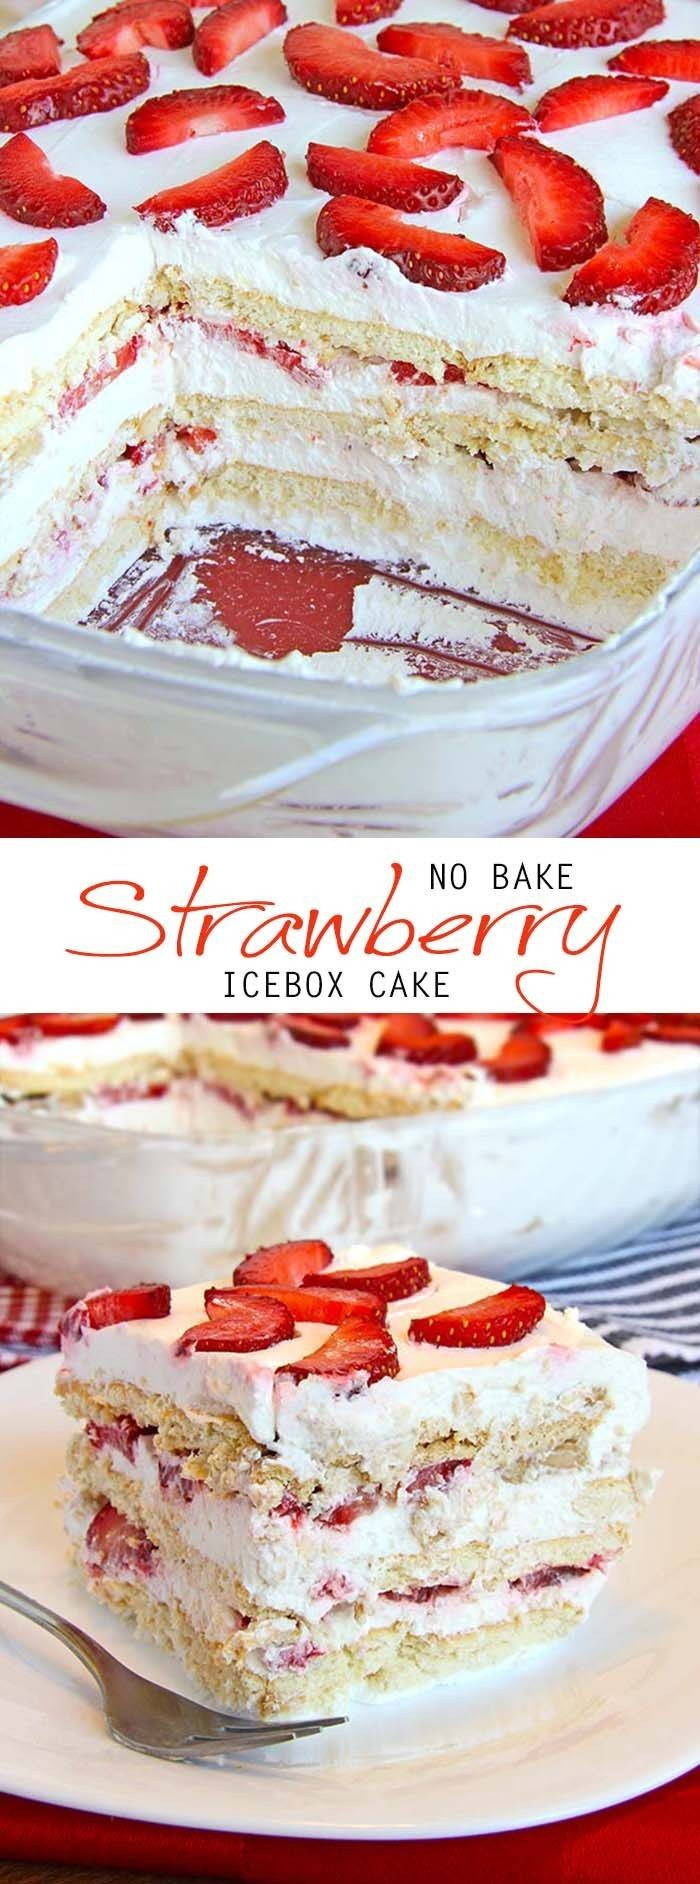 Easy Desserts Pinterest
 Looking for a quick and easy Spring Summer dessert recipe